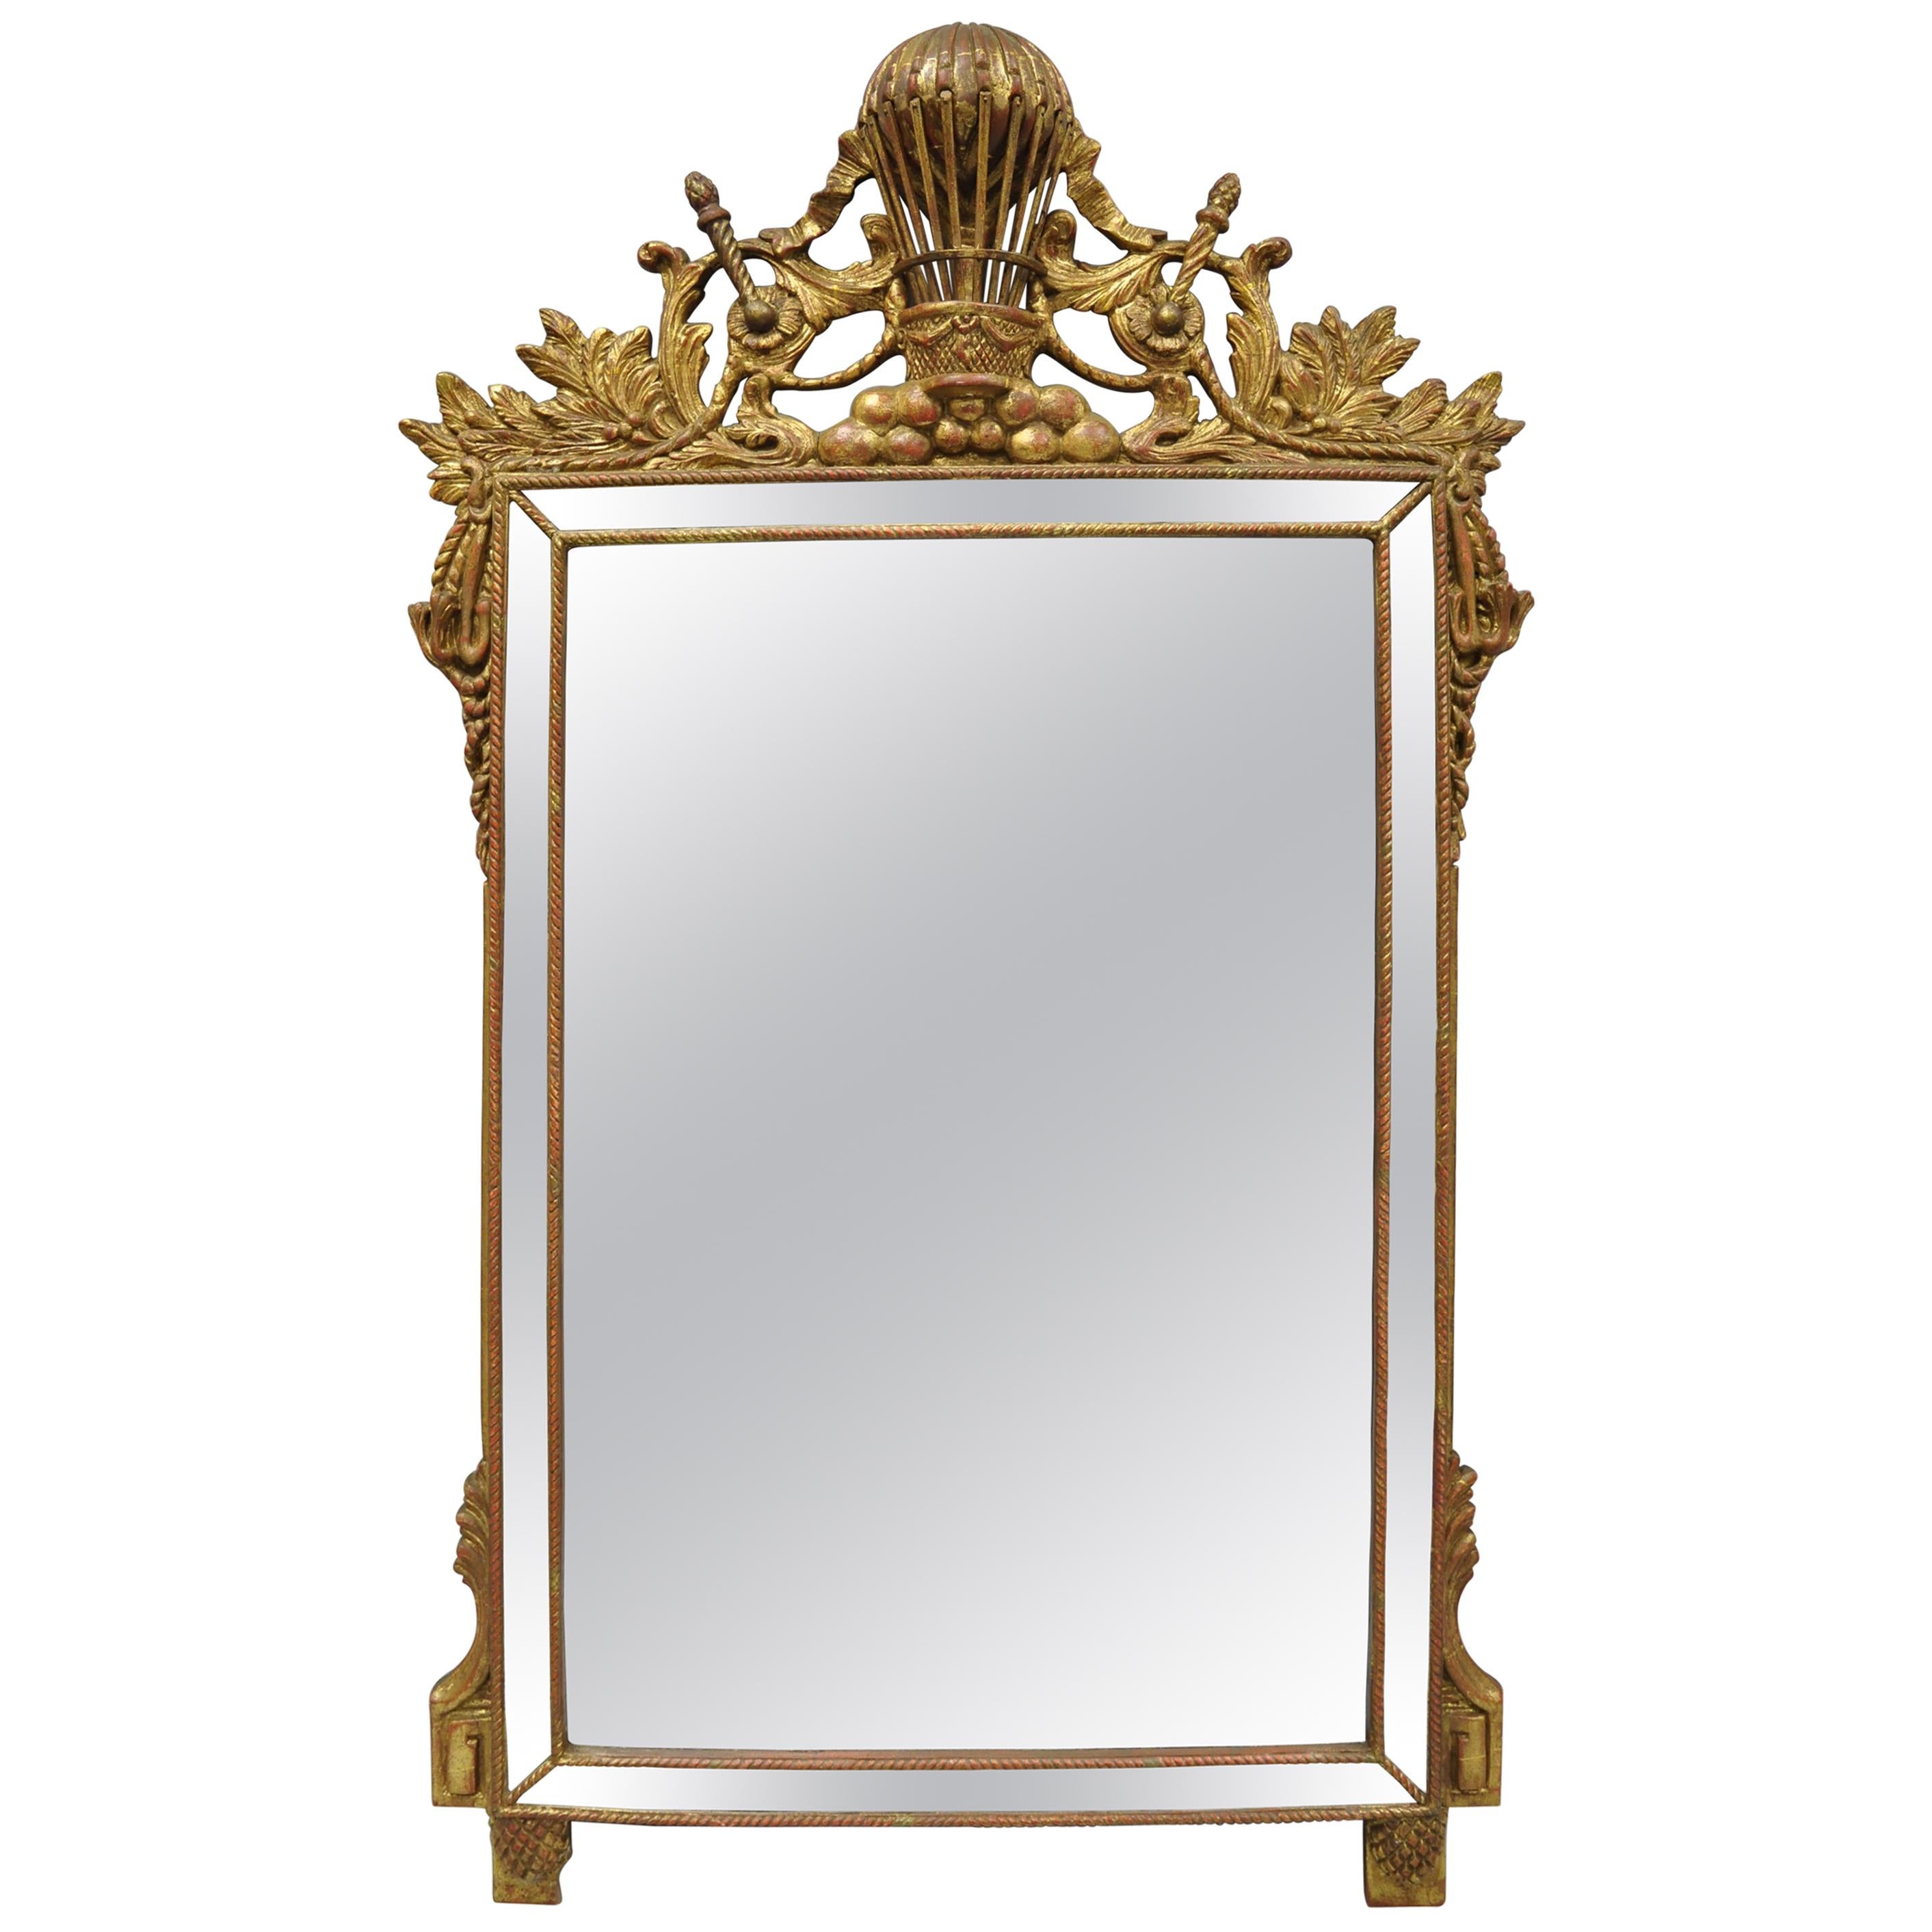 Italian Gold Giltwood French Empire Style Mirror with Hot Air Balloon Crest